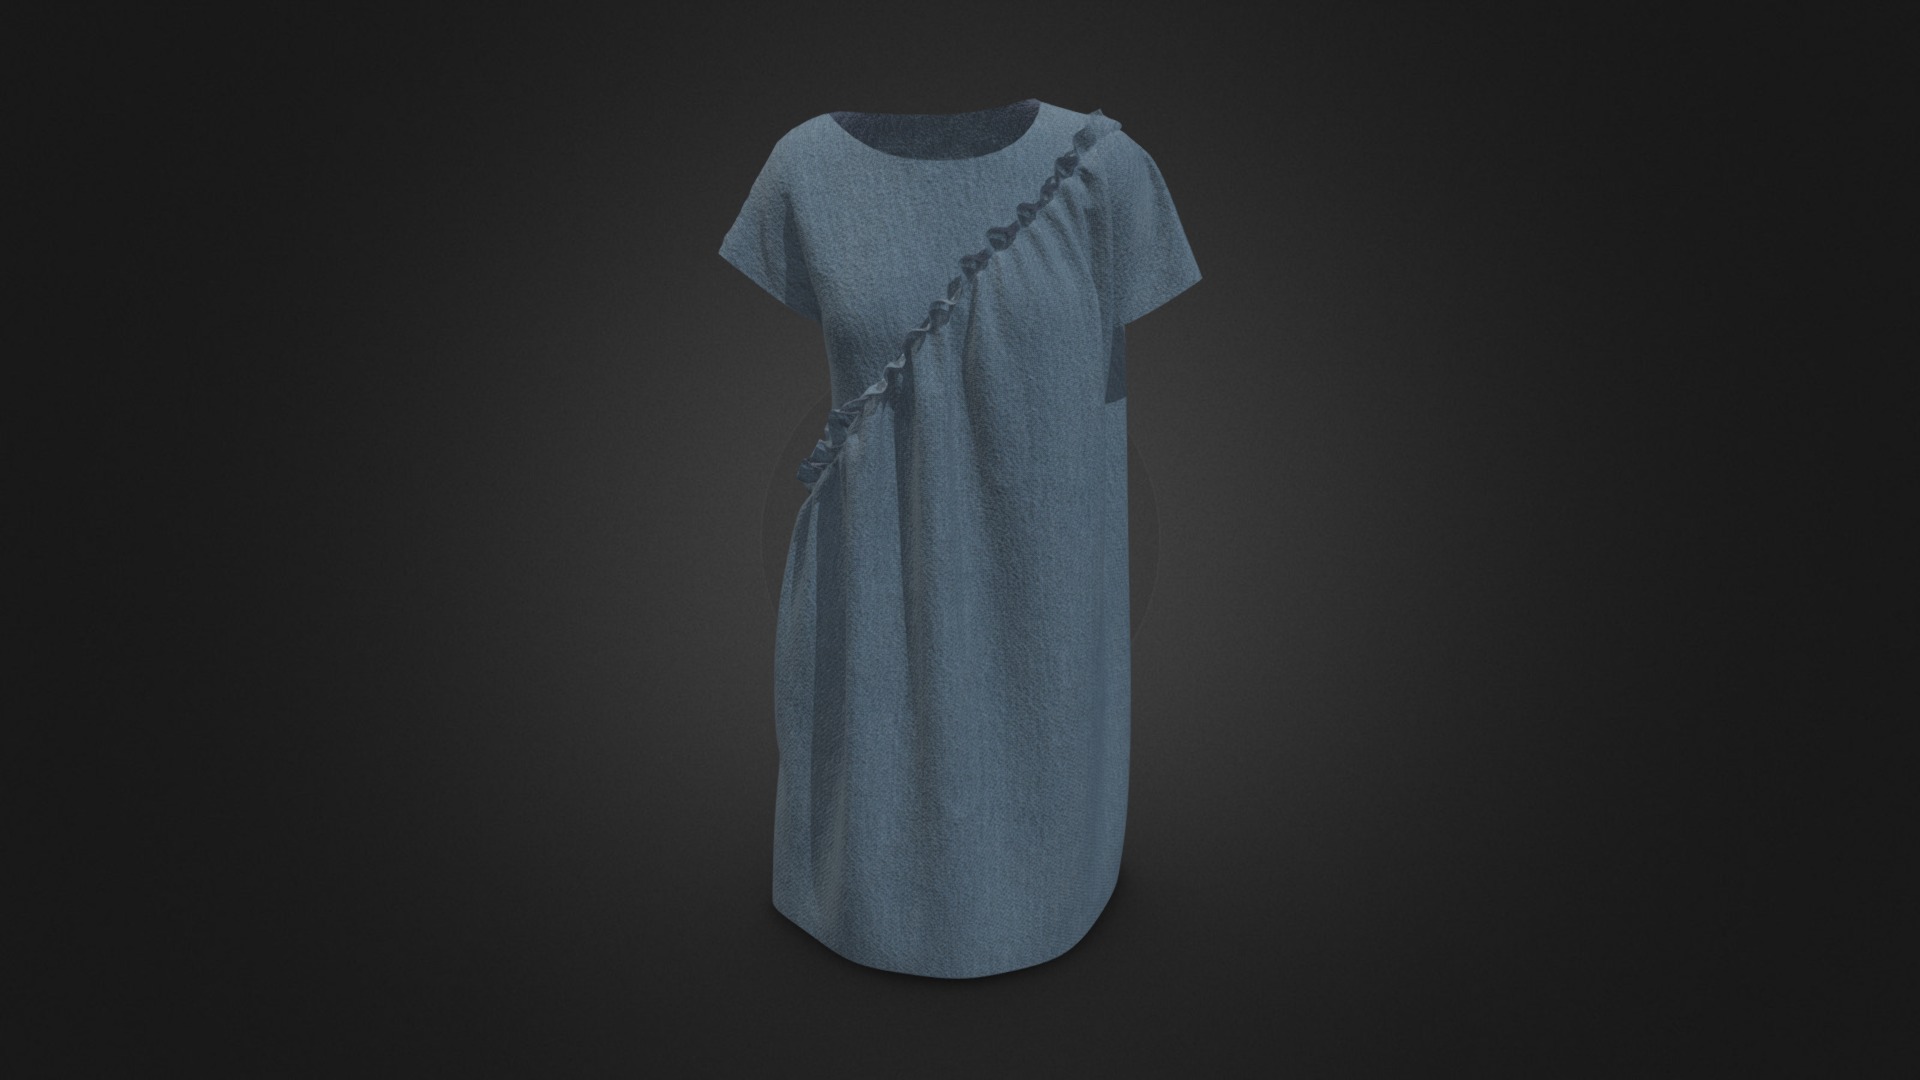 3D model A Ruffle Dress - This is a 3D model of the A Ruffle Dress. The 3D model is about a white shirt on a black background.